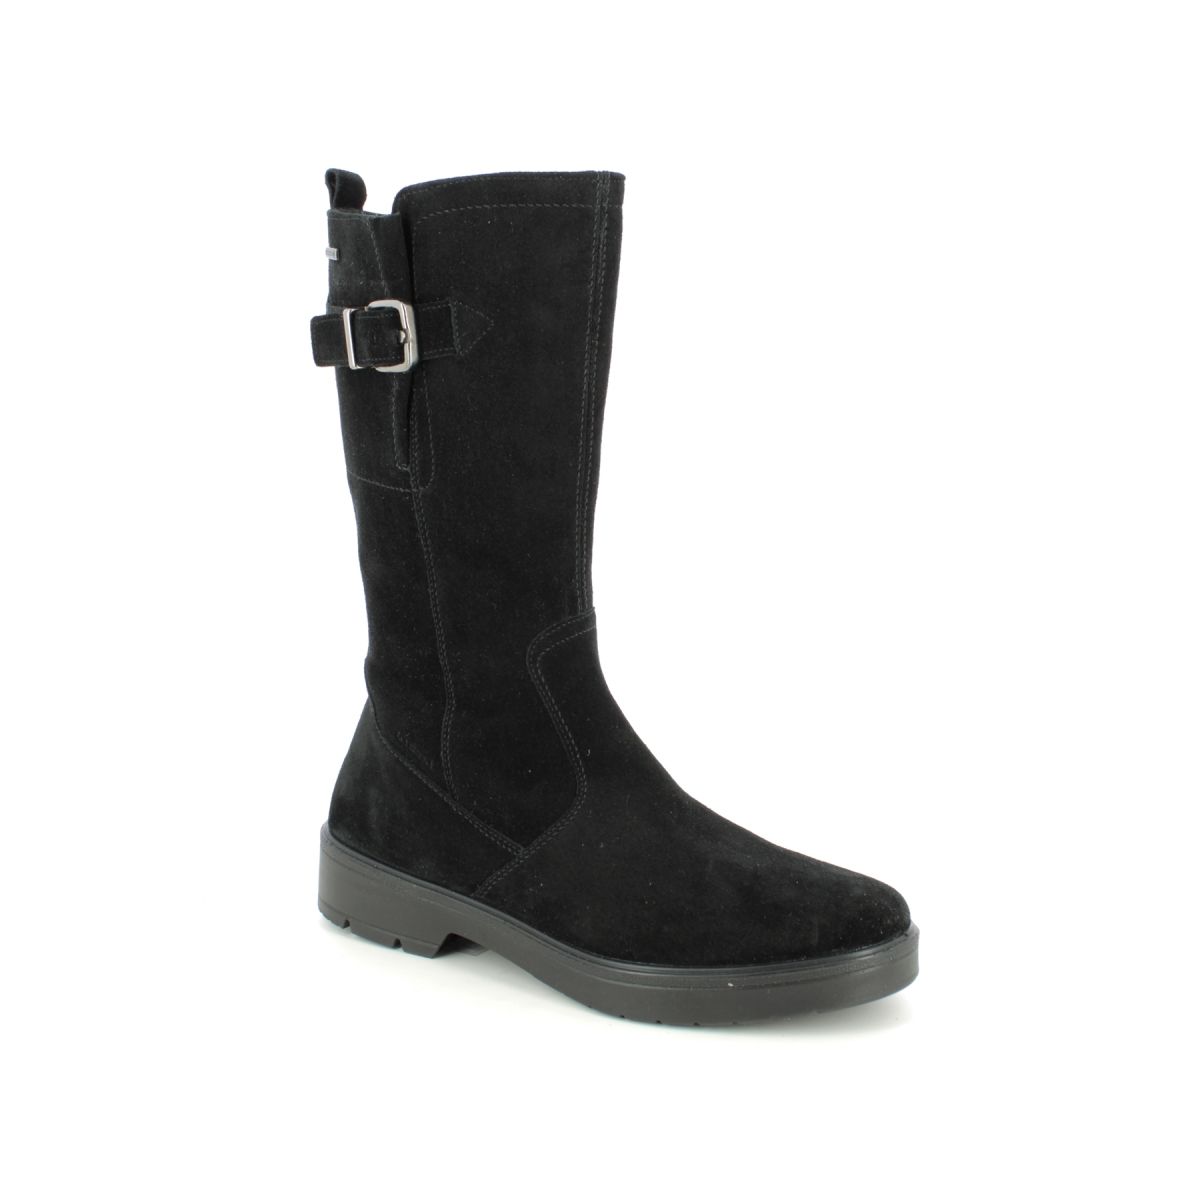 Legero Mystic Mid Gtx Black Suede Womens Mid Calf Boots 2000196-0000 In Size 6 In Plain Black Suede